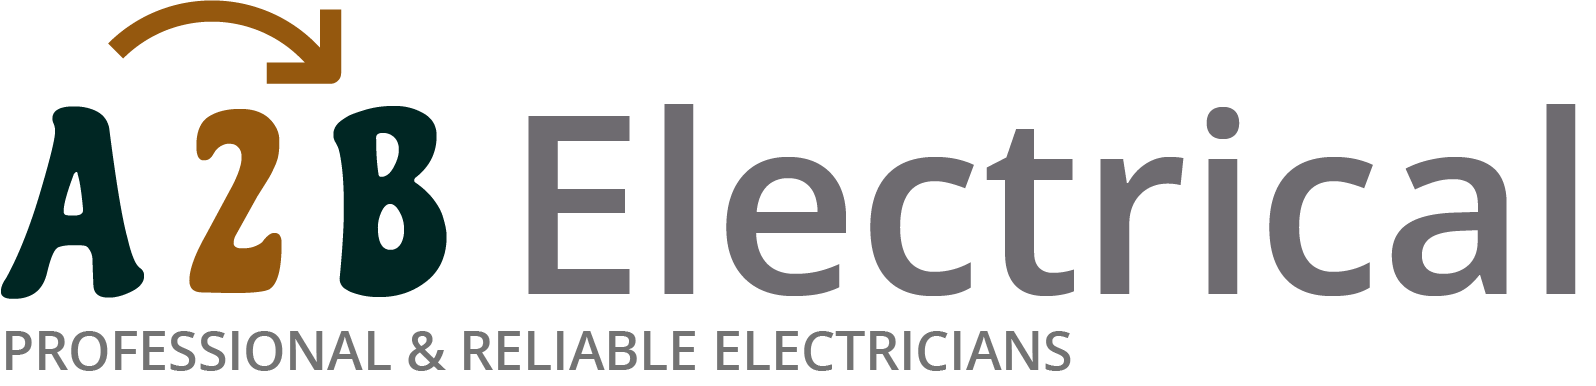 If you have electrical wiring problems in Swansea, we can provide an electrician to have a look for you. 